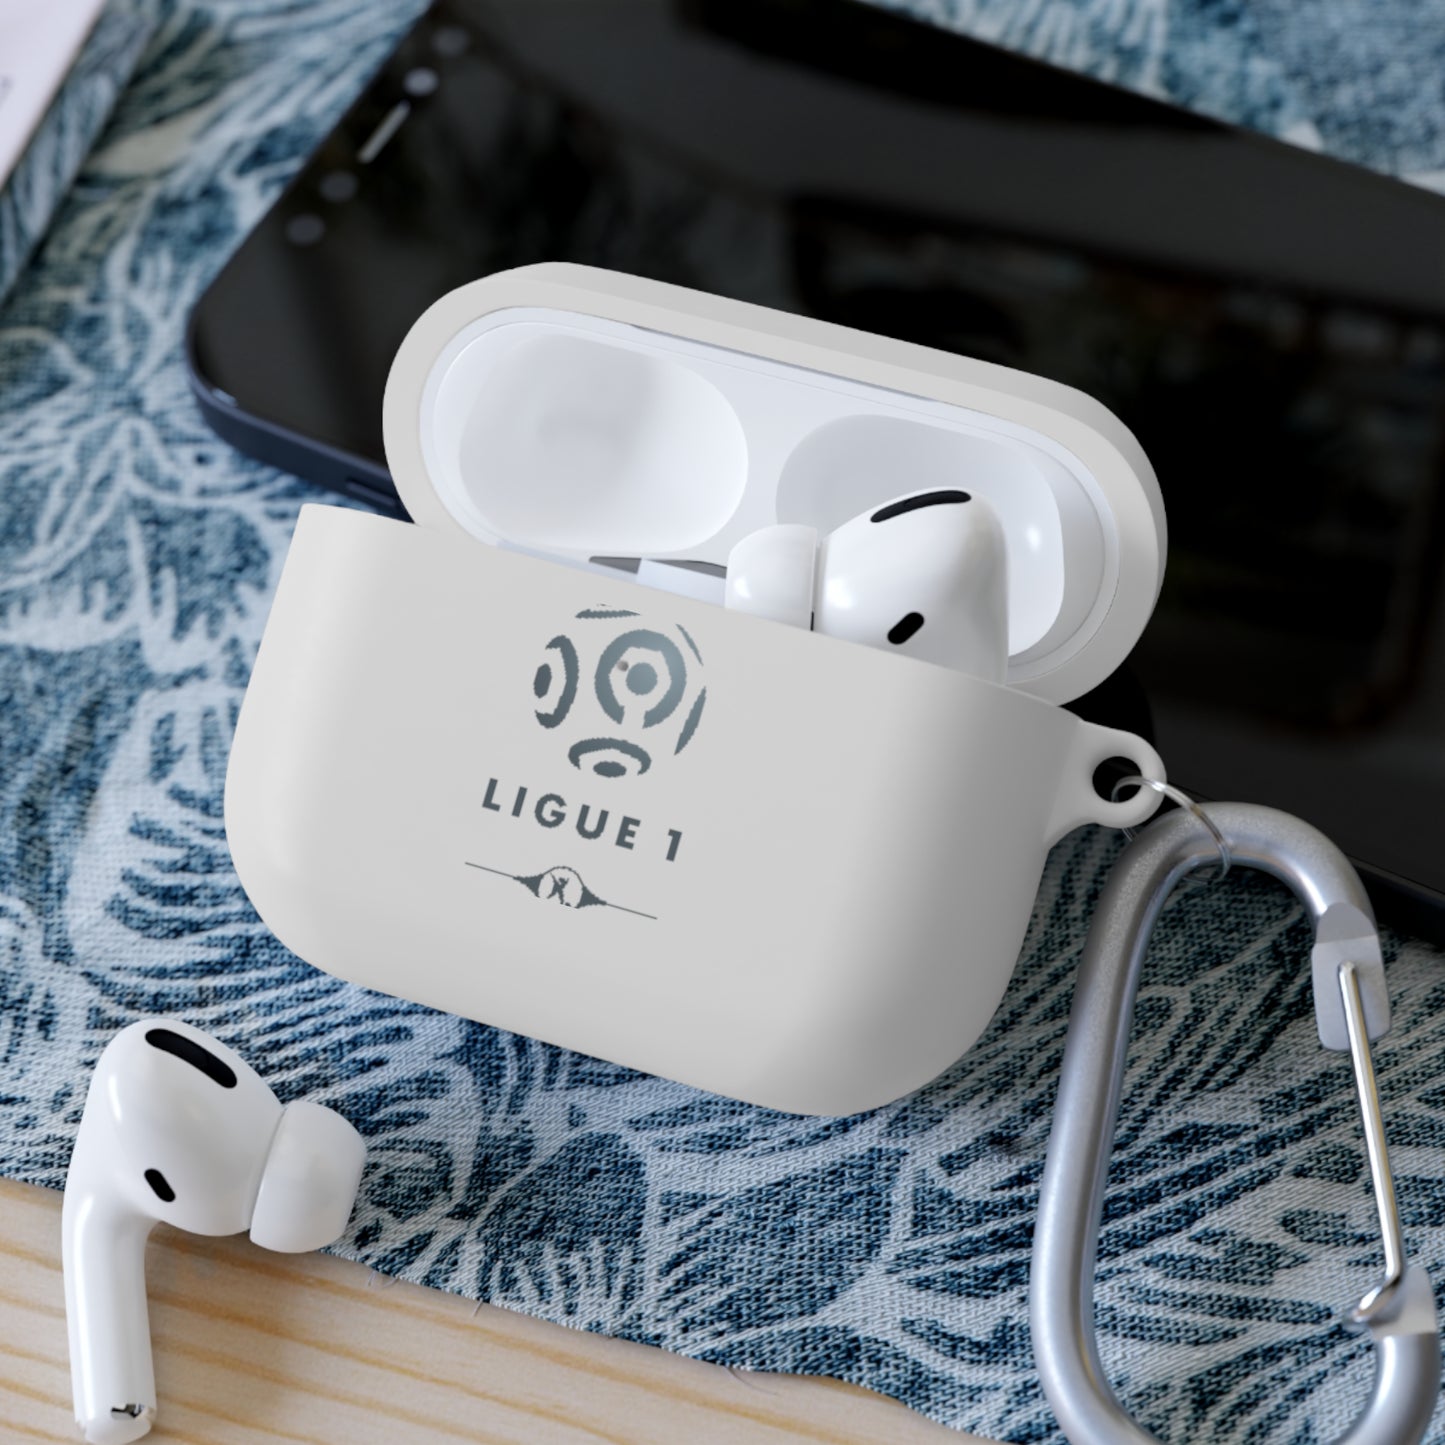 Ligue 1 AirPods and AirPods Pro Case Cover